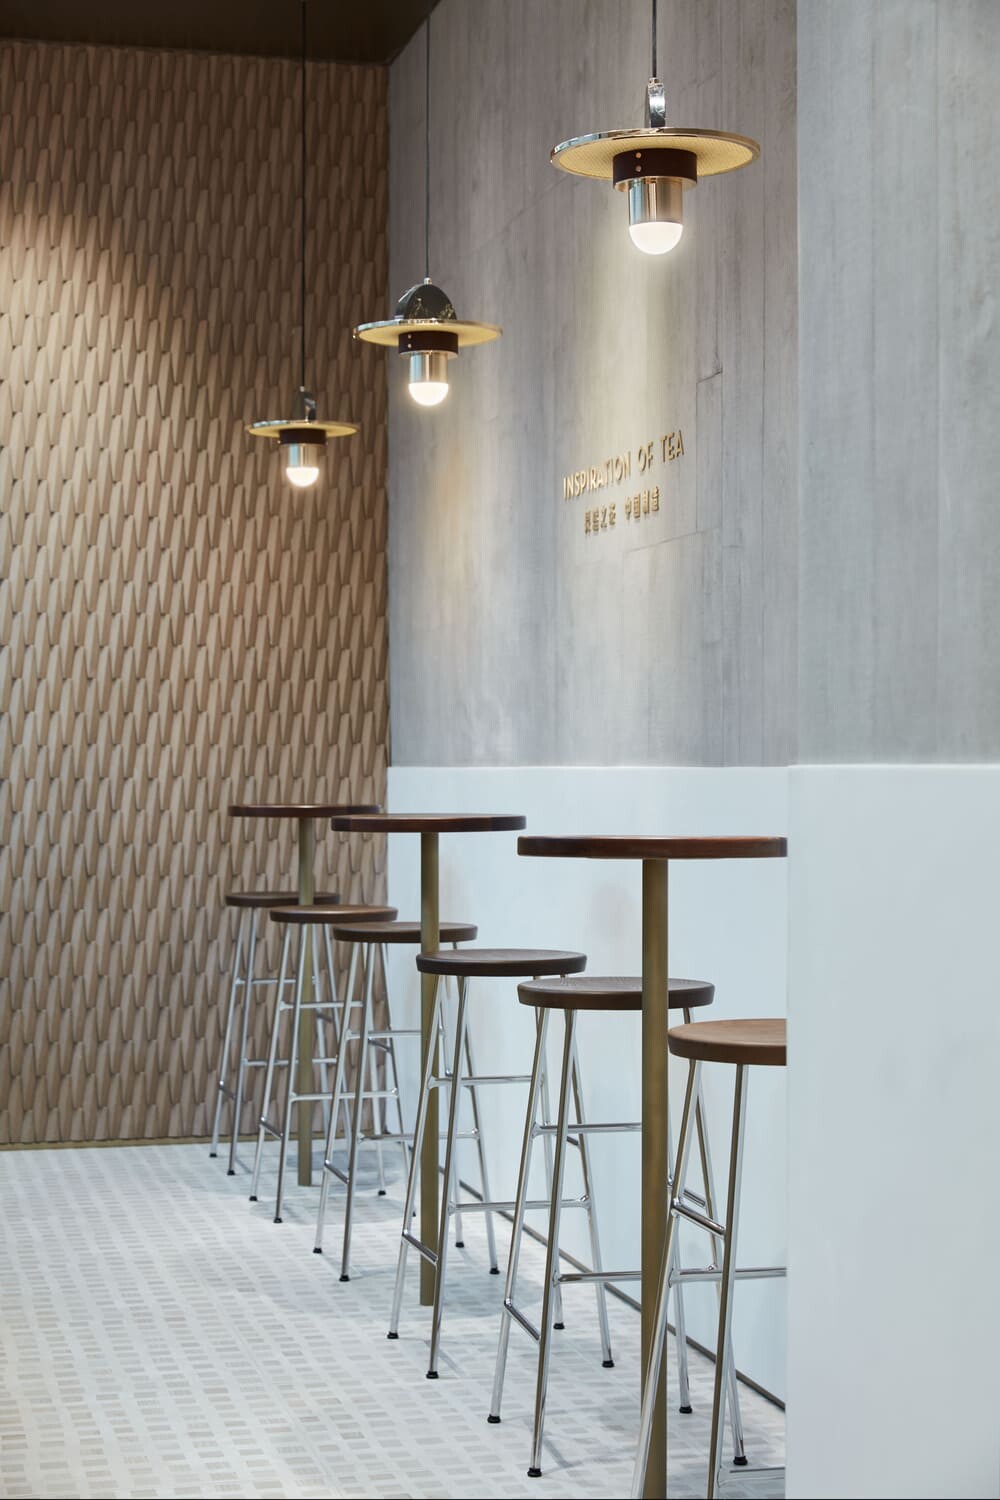 Heytea Lab Guangzhou by Leaping Creative